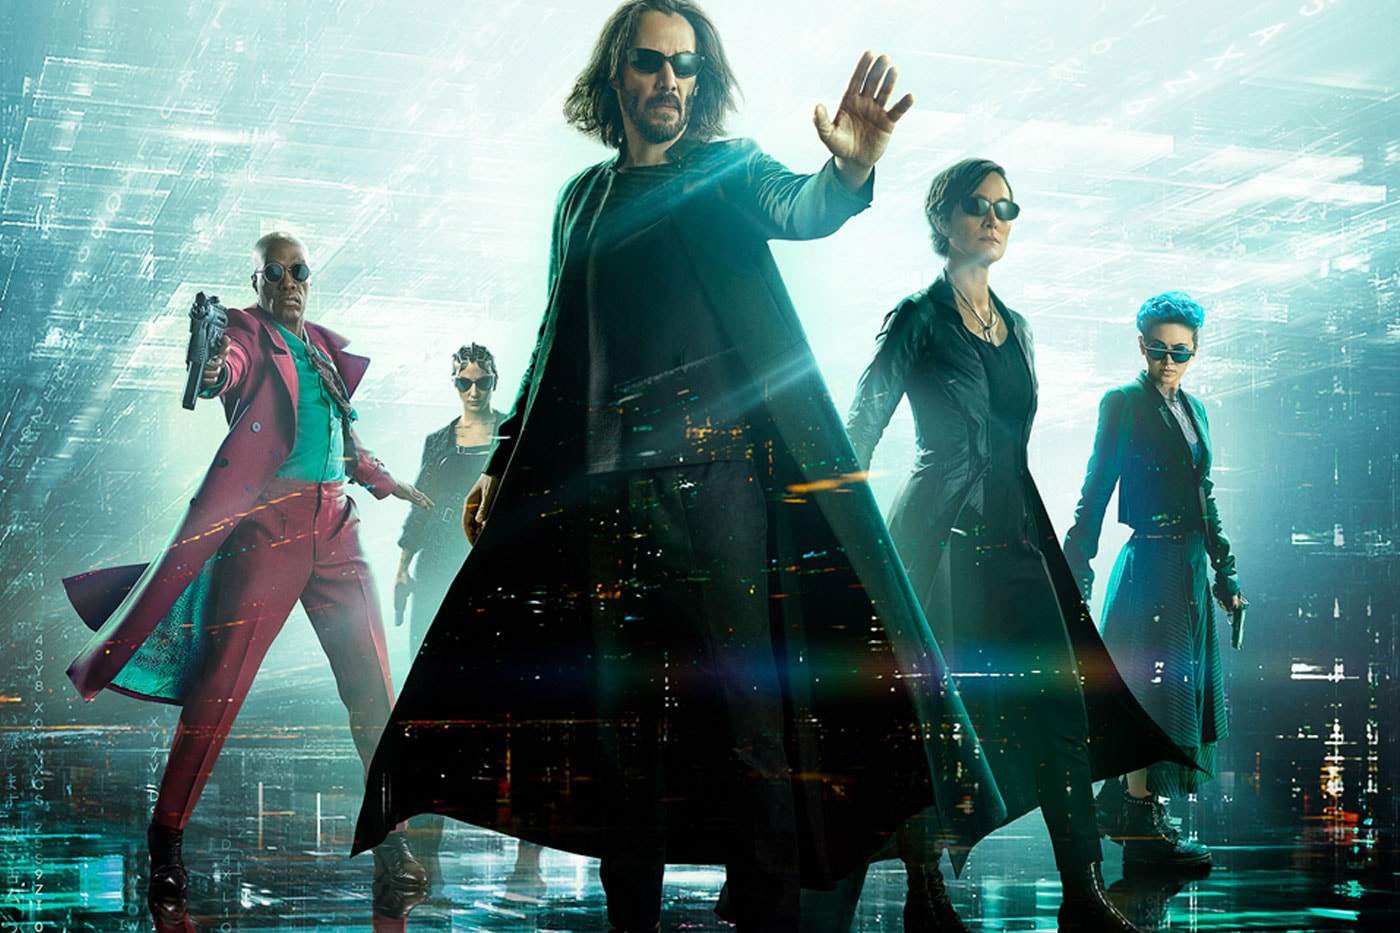 Here Are the Initial Reactions to 'The Matrix Resurrections' keanu reeves hbo max carrie-anne moss lana waschowski 